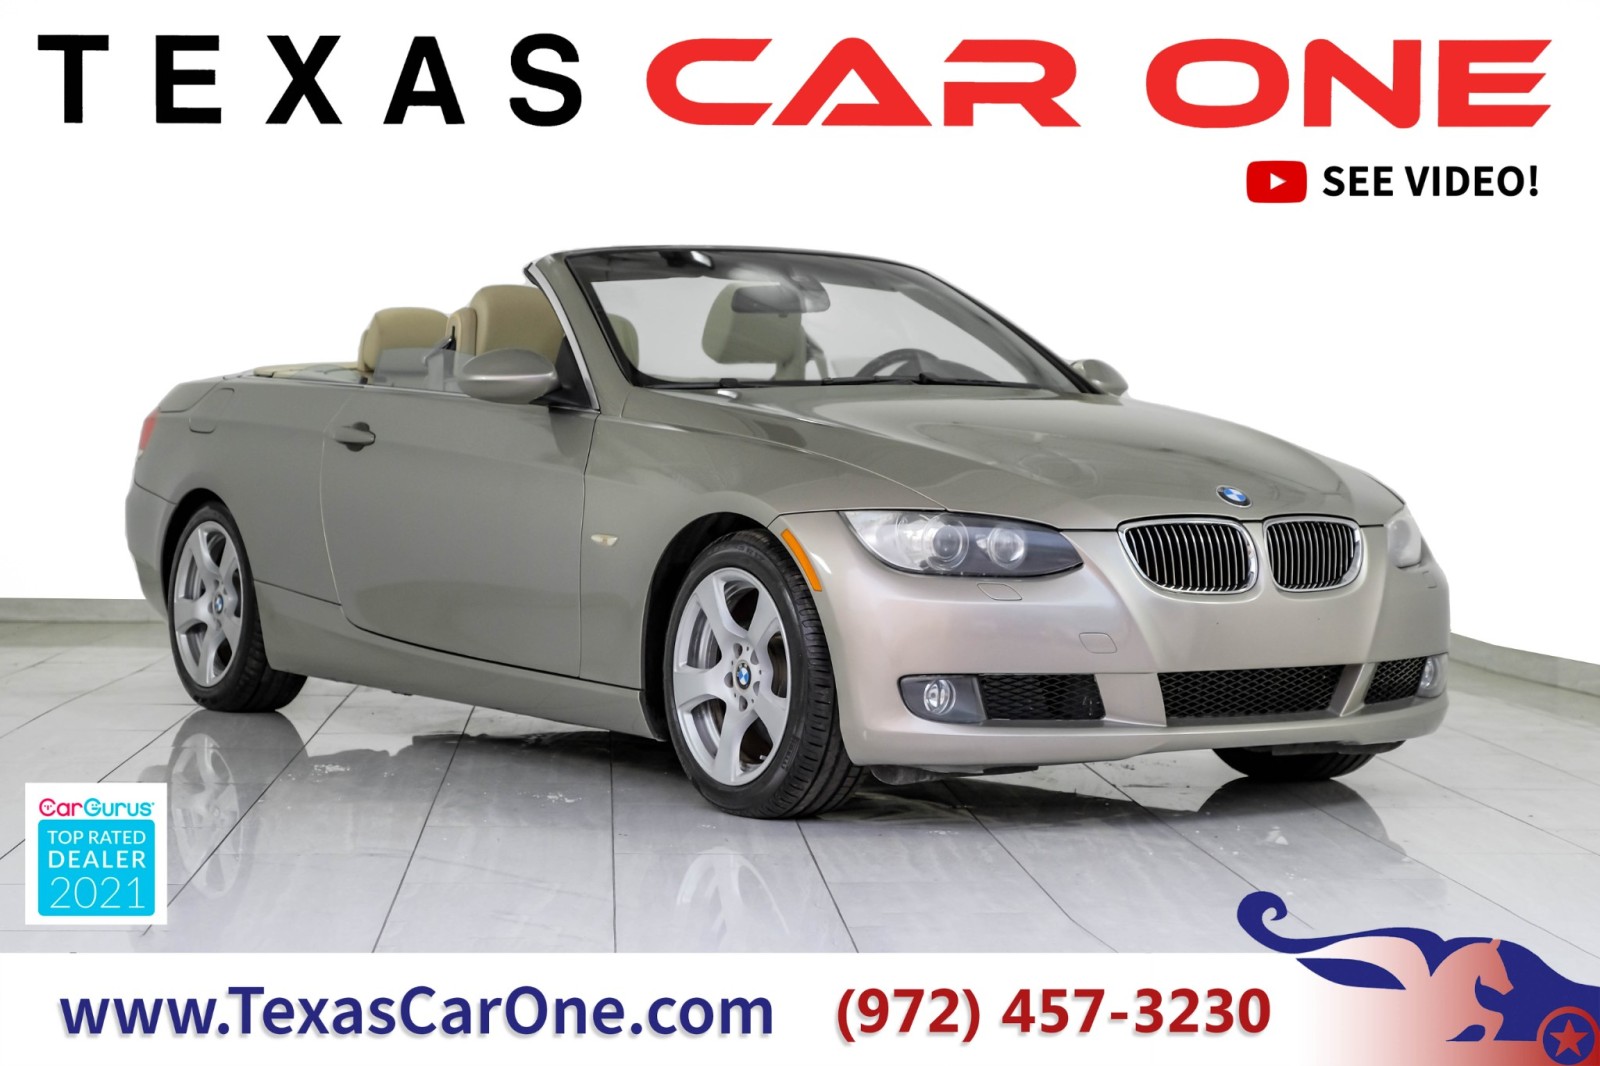 2007 BMW 328i Convertible AUTOMATIC LEATHER HEATED SEATS PUSH BUTTON START D 1